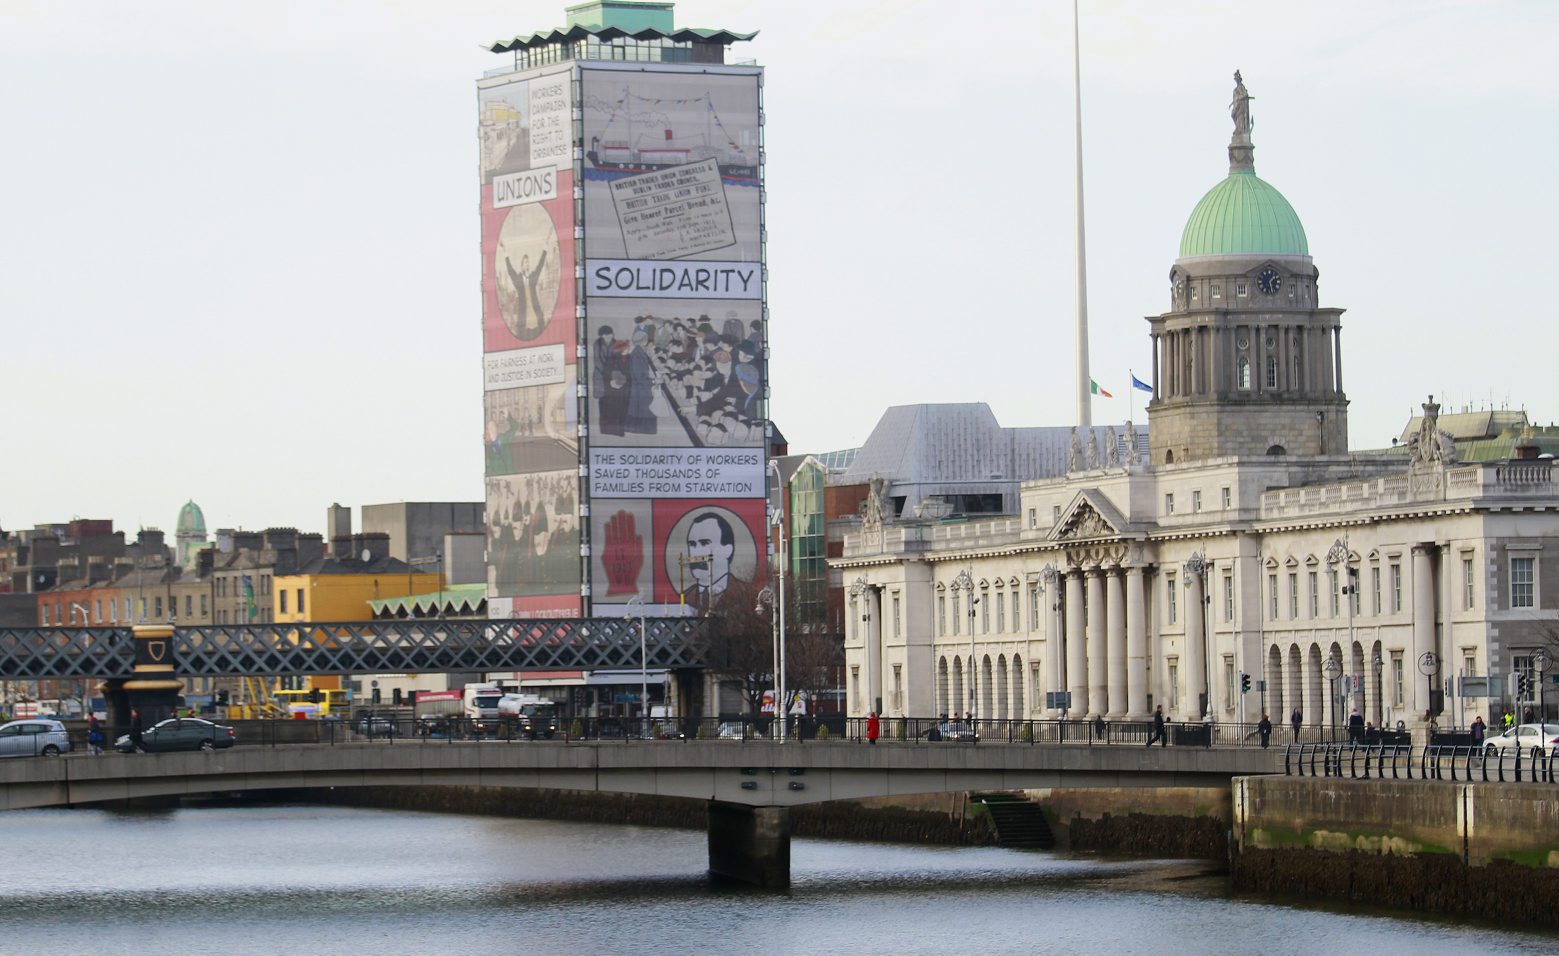 A general view of the customs house building and the River Liffey in the centre of Dublin, Ireland,  Friday,Dec. 13, 2013. On Sunday, Ireland officially ends its reliance on a 67.5 billion-euro ($93 billion) loan program that European governments and the International Monetary Fund provided in 2010 to save the Irish from national bankruptcy. Ireland's finance chief says the country's exit from its international bailout this week should be celebrated as a eurozone triumph, but won't mean an end to austerity for the debt-battered Irish.  (AP Photo/Peter Morrison) Ireland IMF